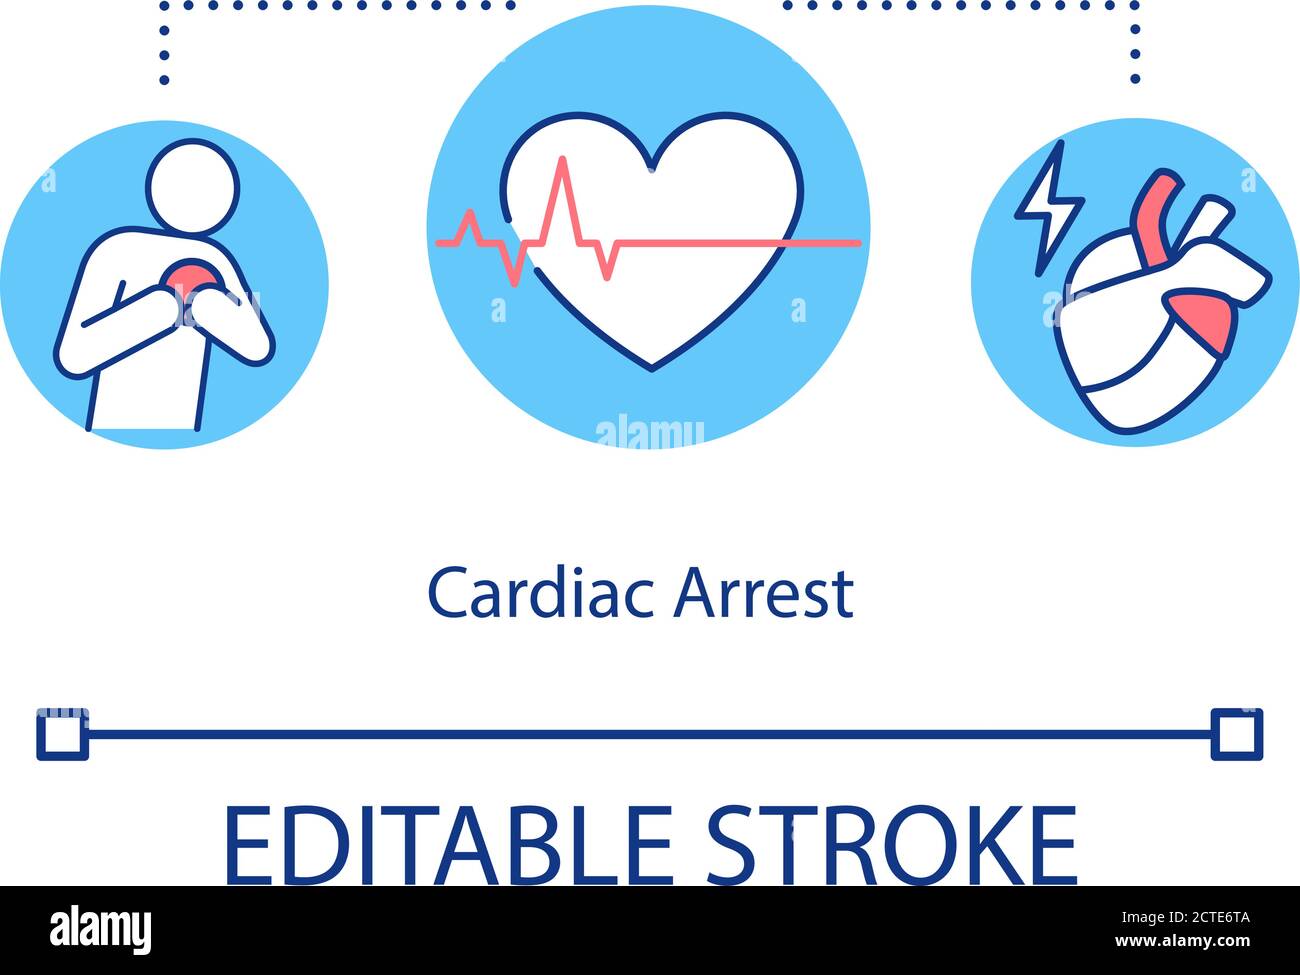 Cardiac arrest meaning in tamil